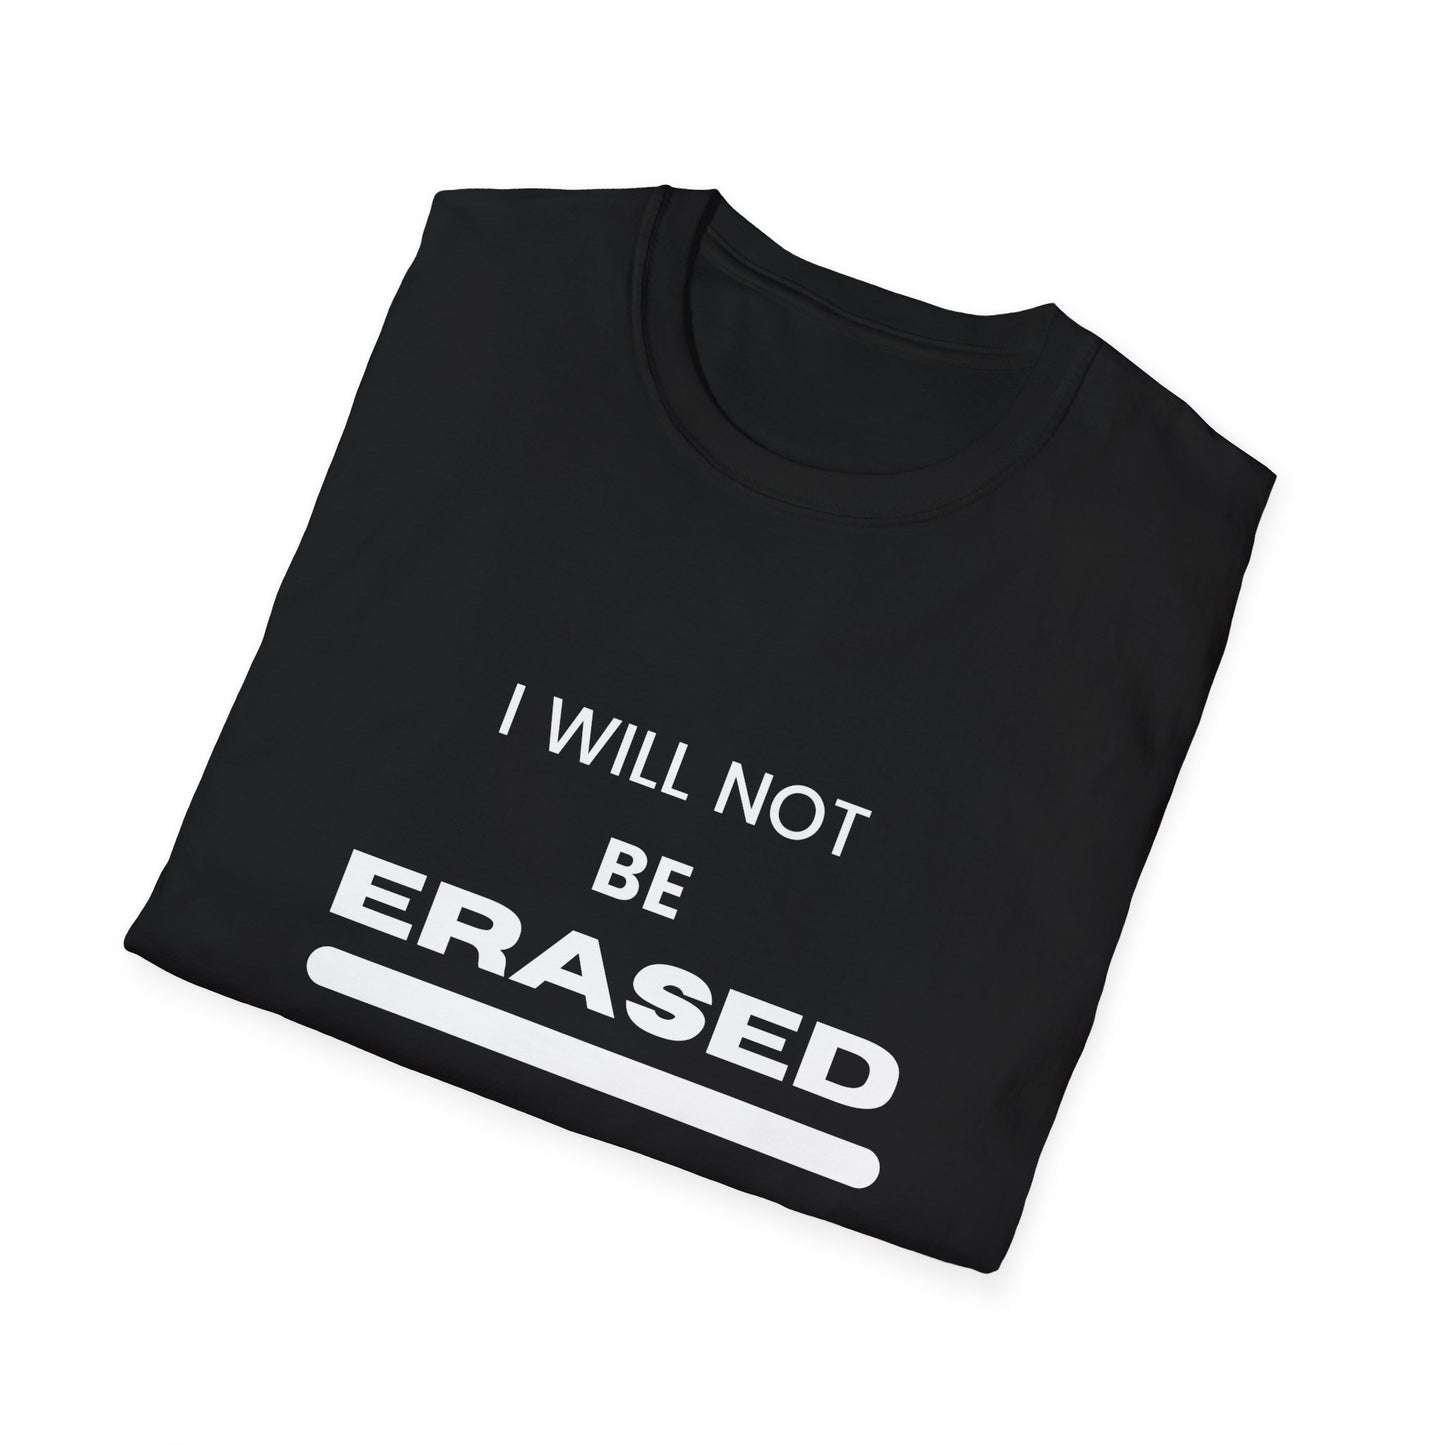 I will Not Be Erased T-Shirt